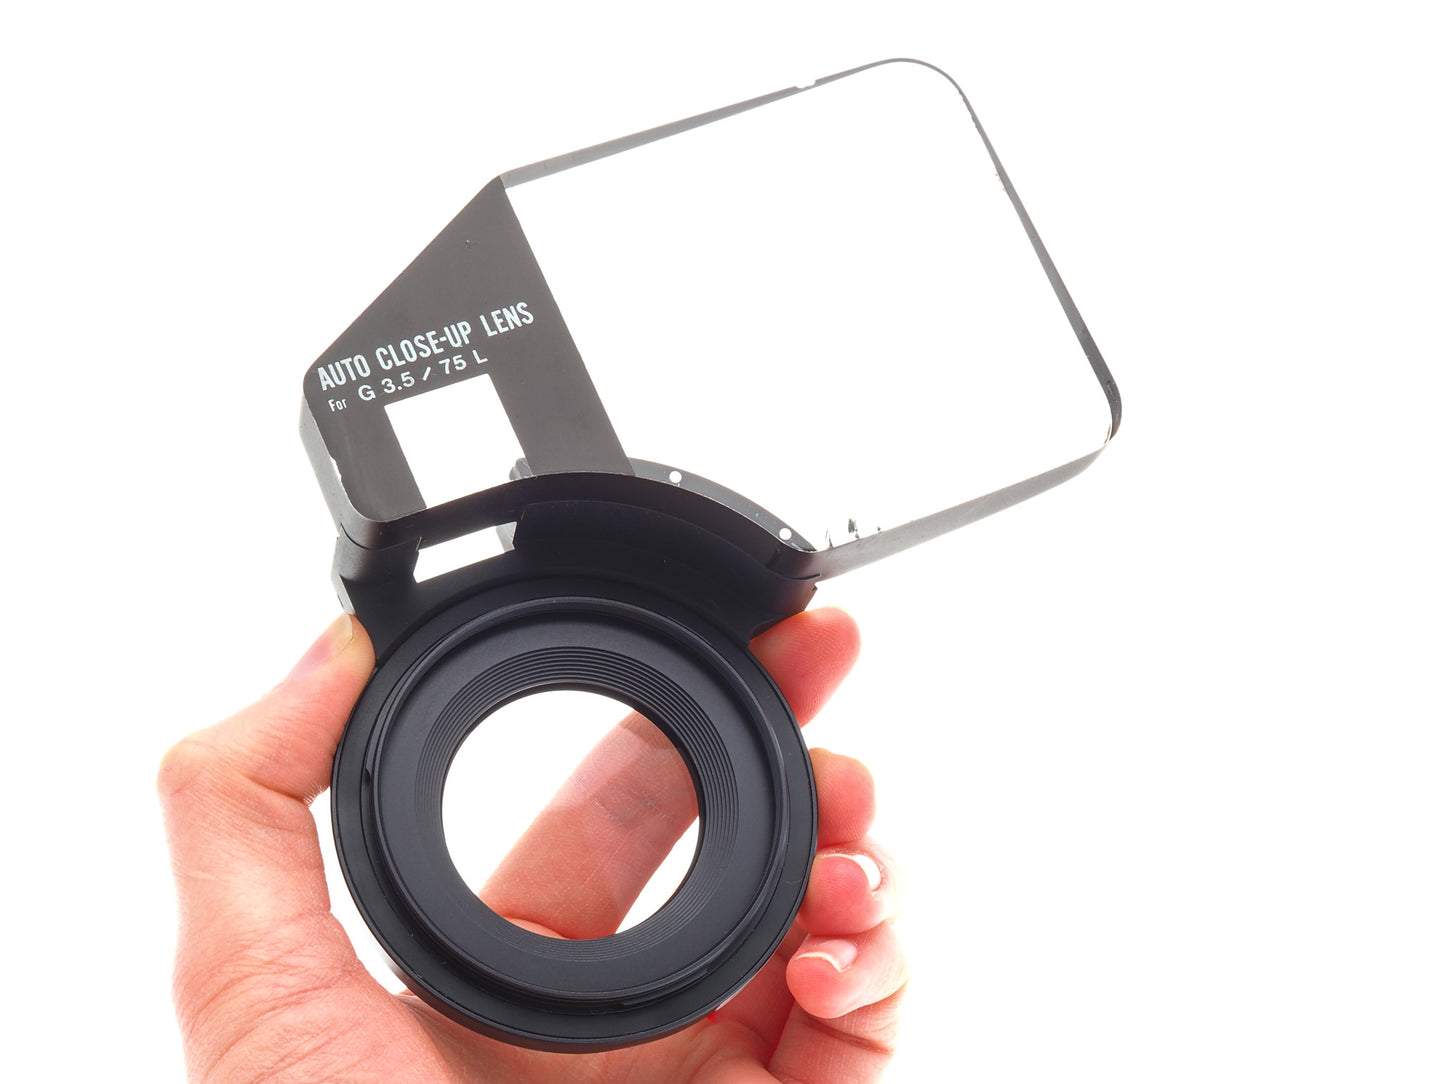 Mamiya Auto Close-Up Lens For 75mm f3.5 G L - Accessory